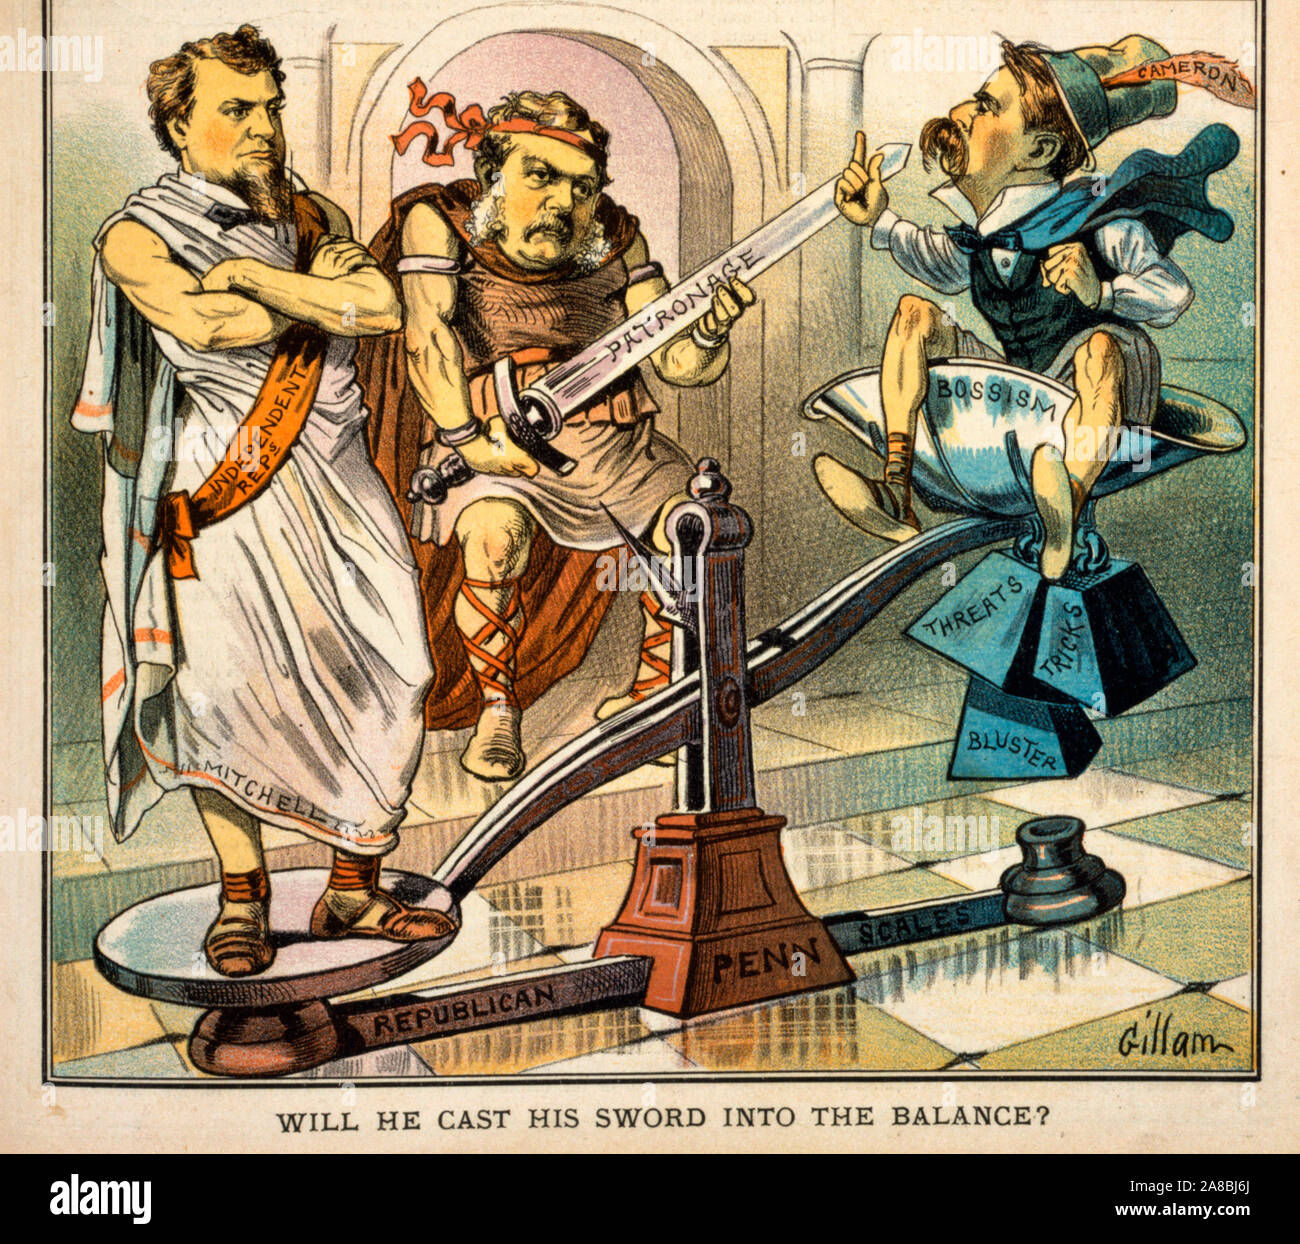 Will he cast his sword into the balance? Cartoon showing Chester Arthur, dressed as a Roman, by 'Republican scales,' holding sword 'patronage,' with Mitchell 'indepencent reps.,' also dressed as a Roman, on one end of the scales, and James Donald Cameron 'bossism' on the other end of scales. Political Cartoon, 1882 Stock Photo